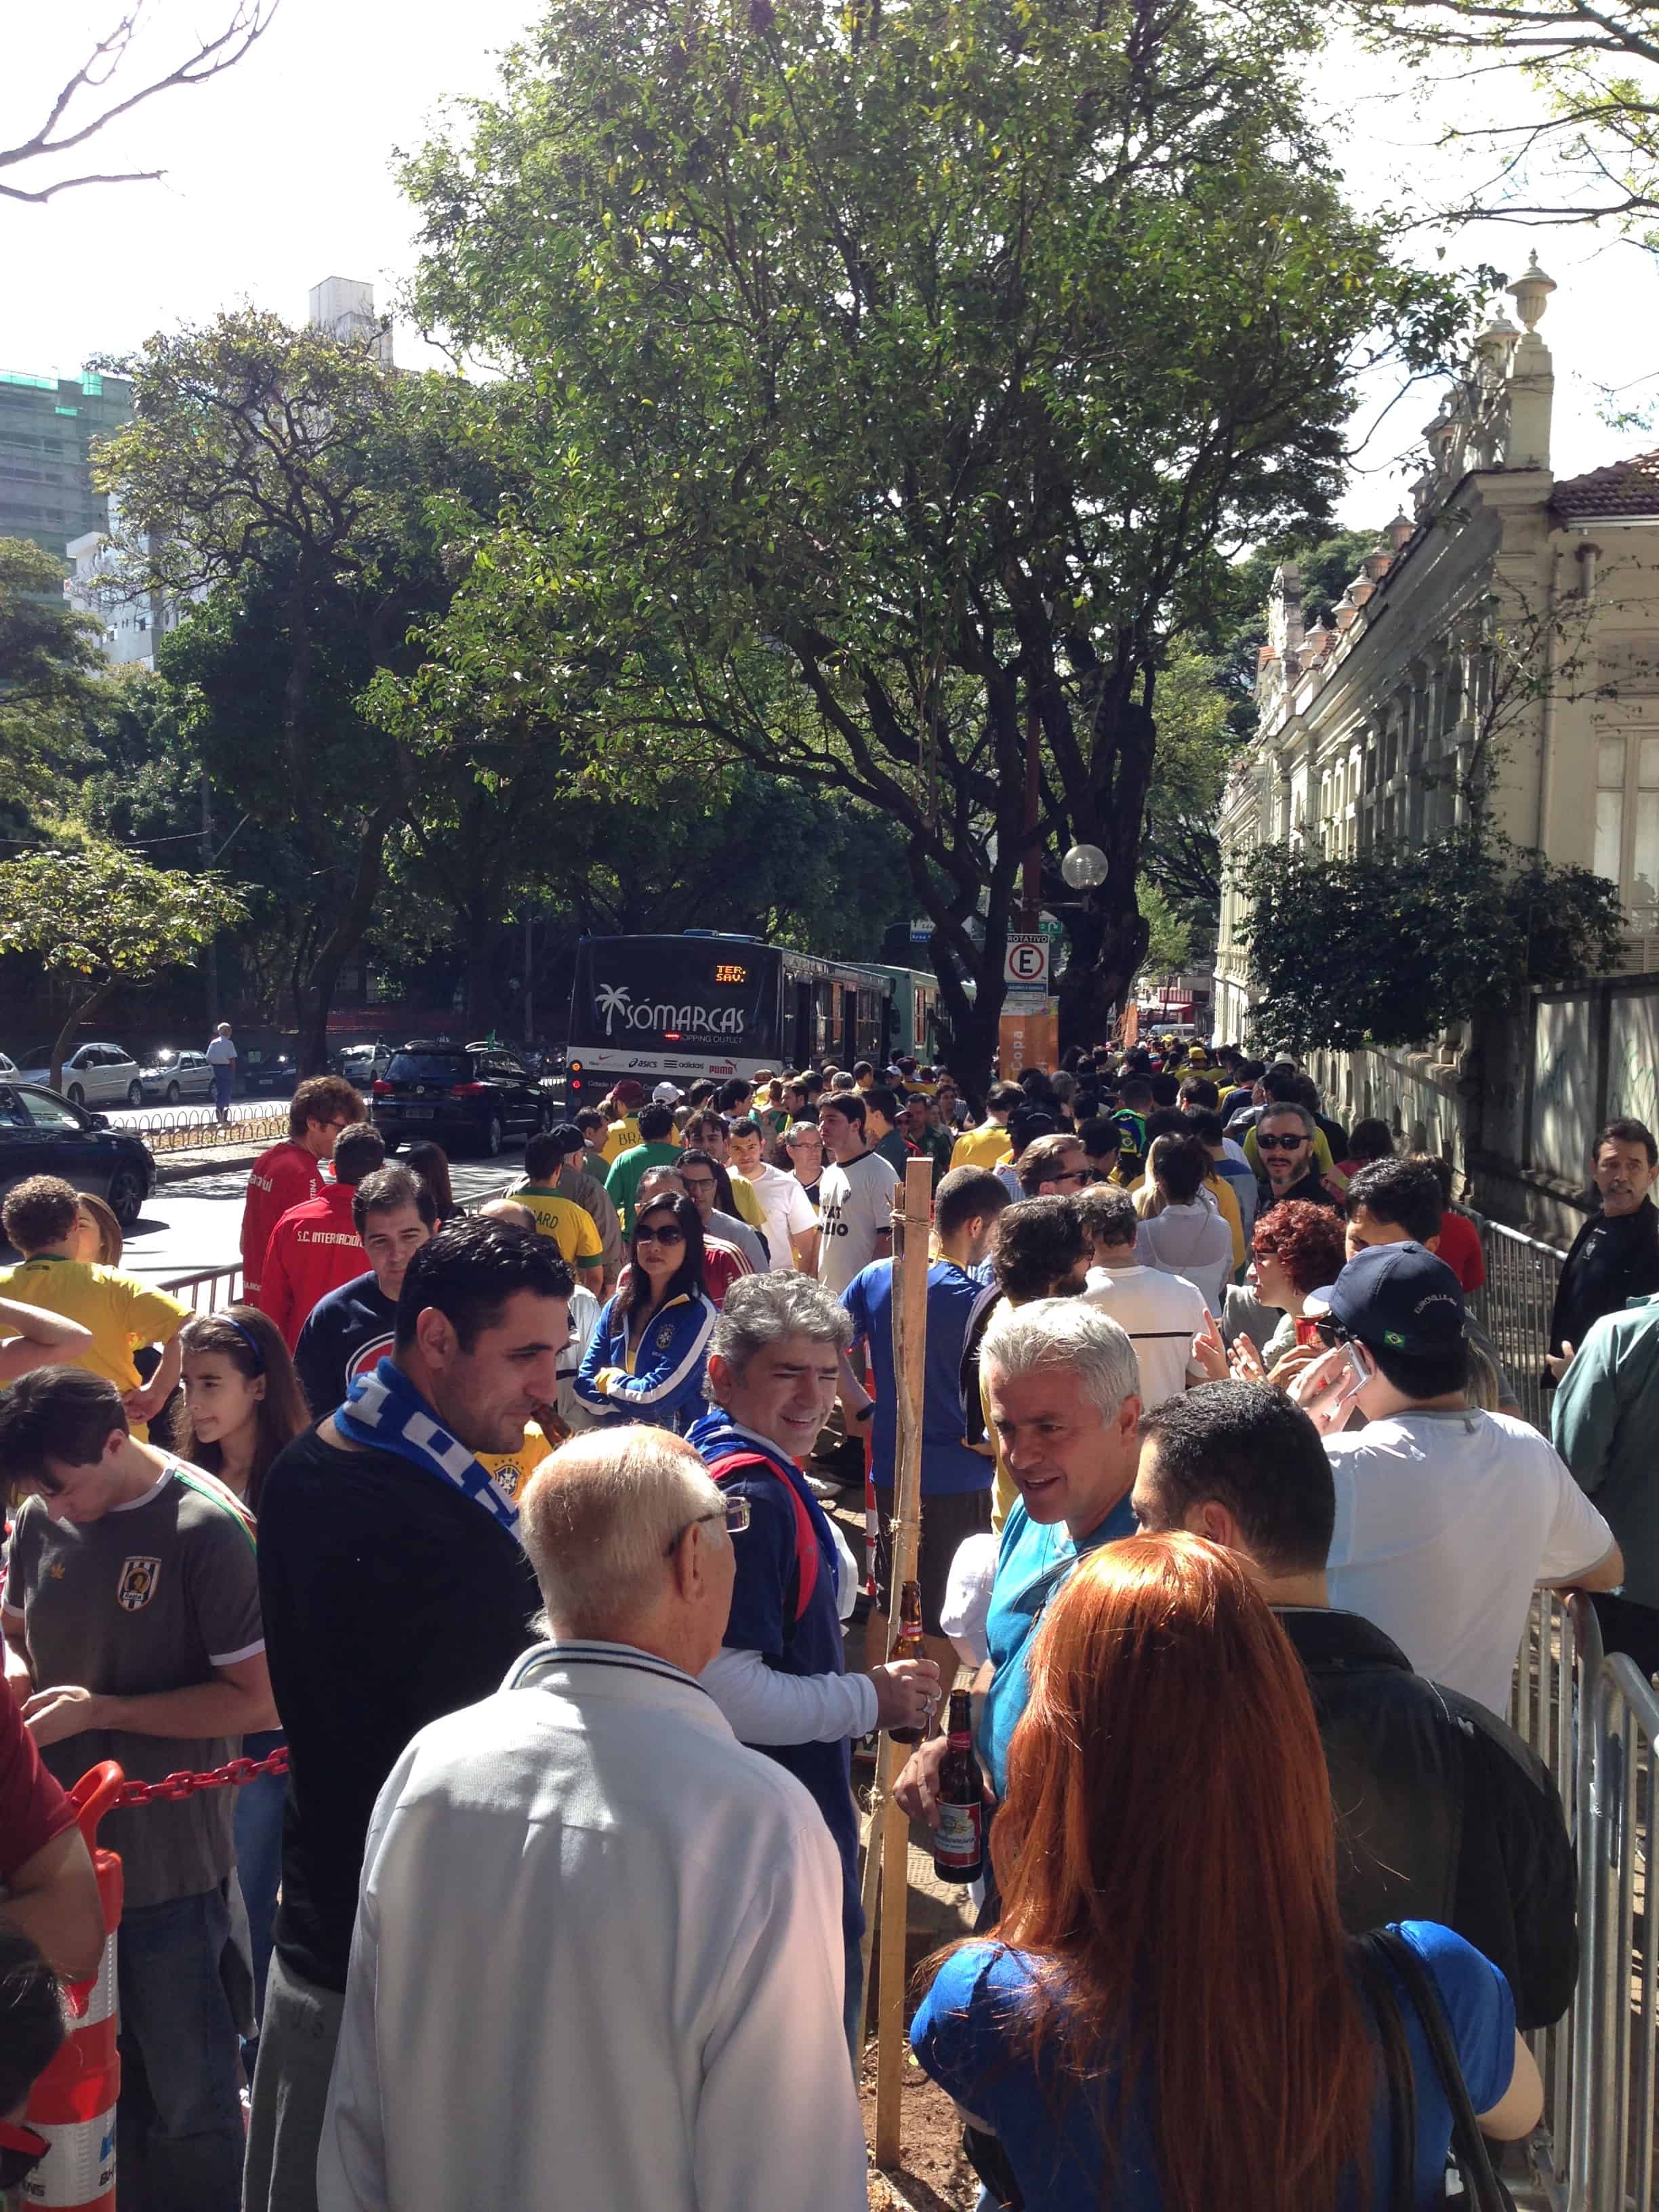 Waiting for the bus to 2014 World Cup at Estádio Mineirão in Belo Horizonte, Brazil